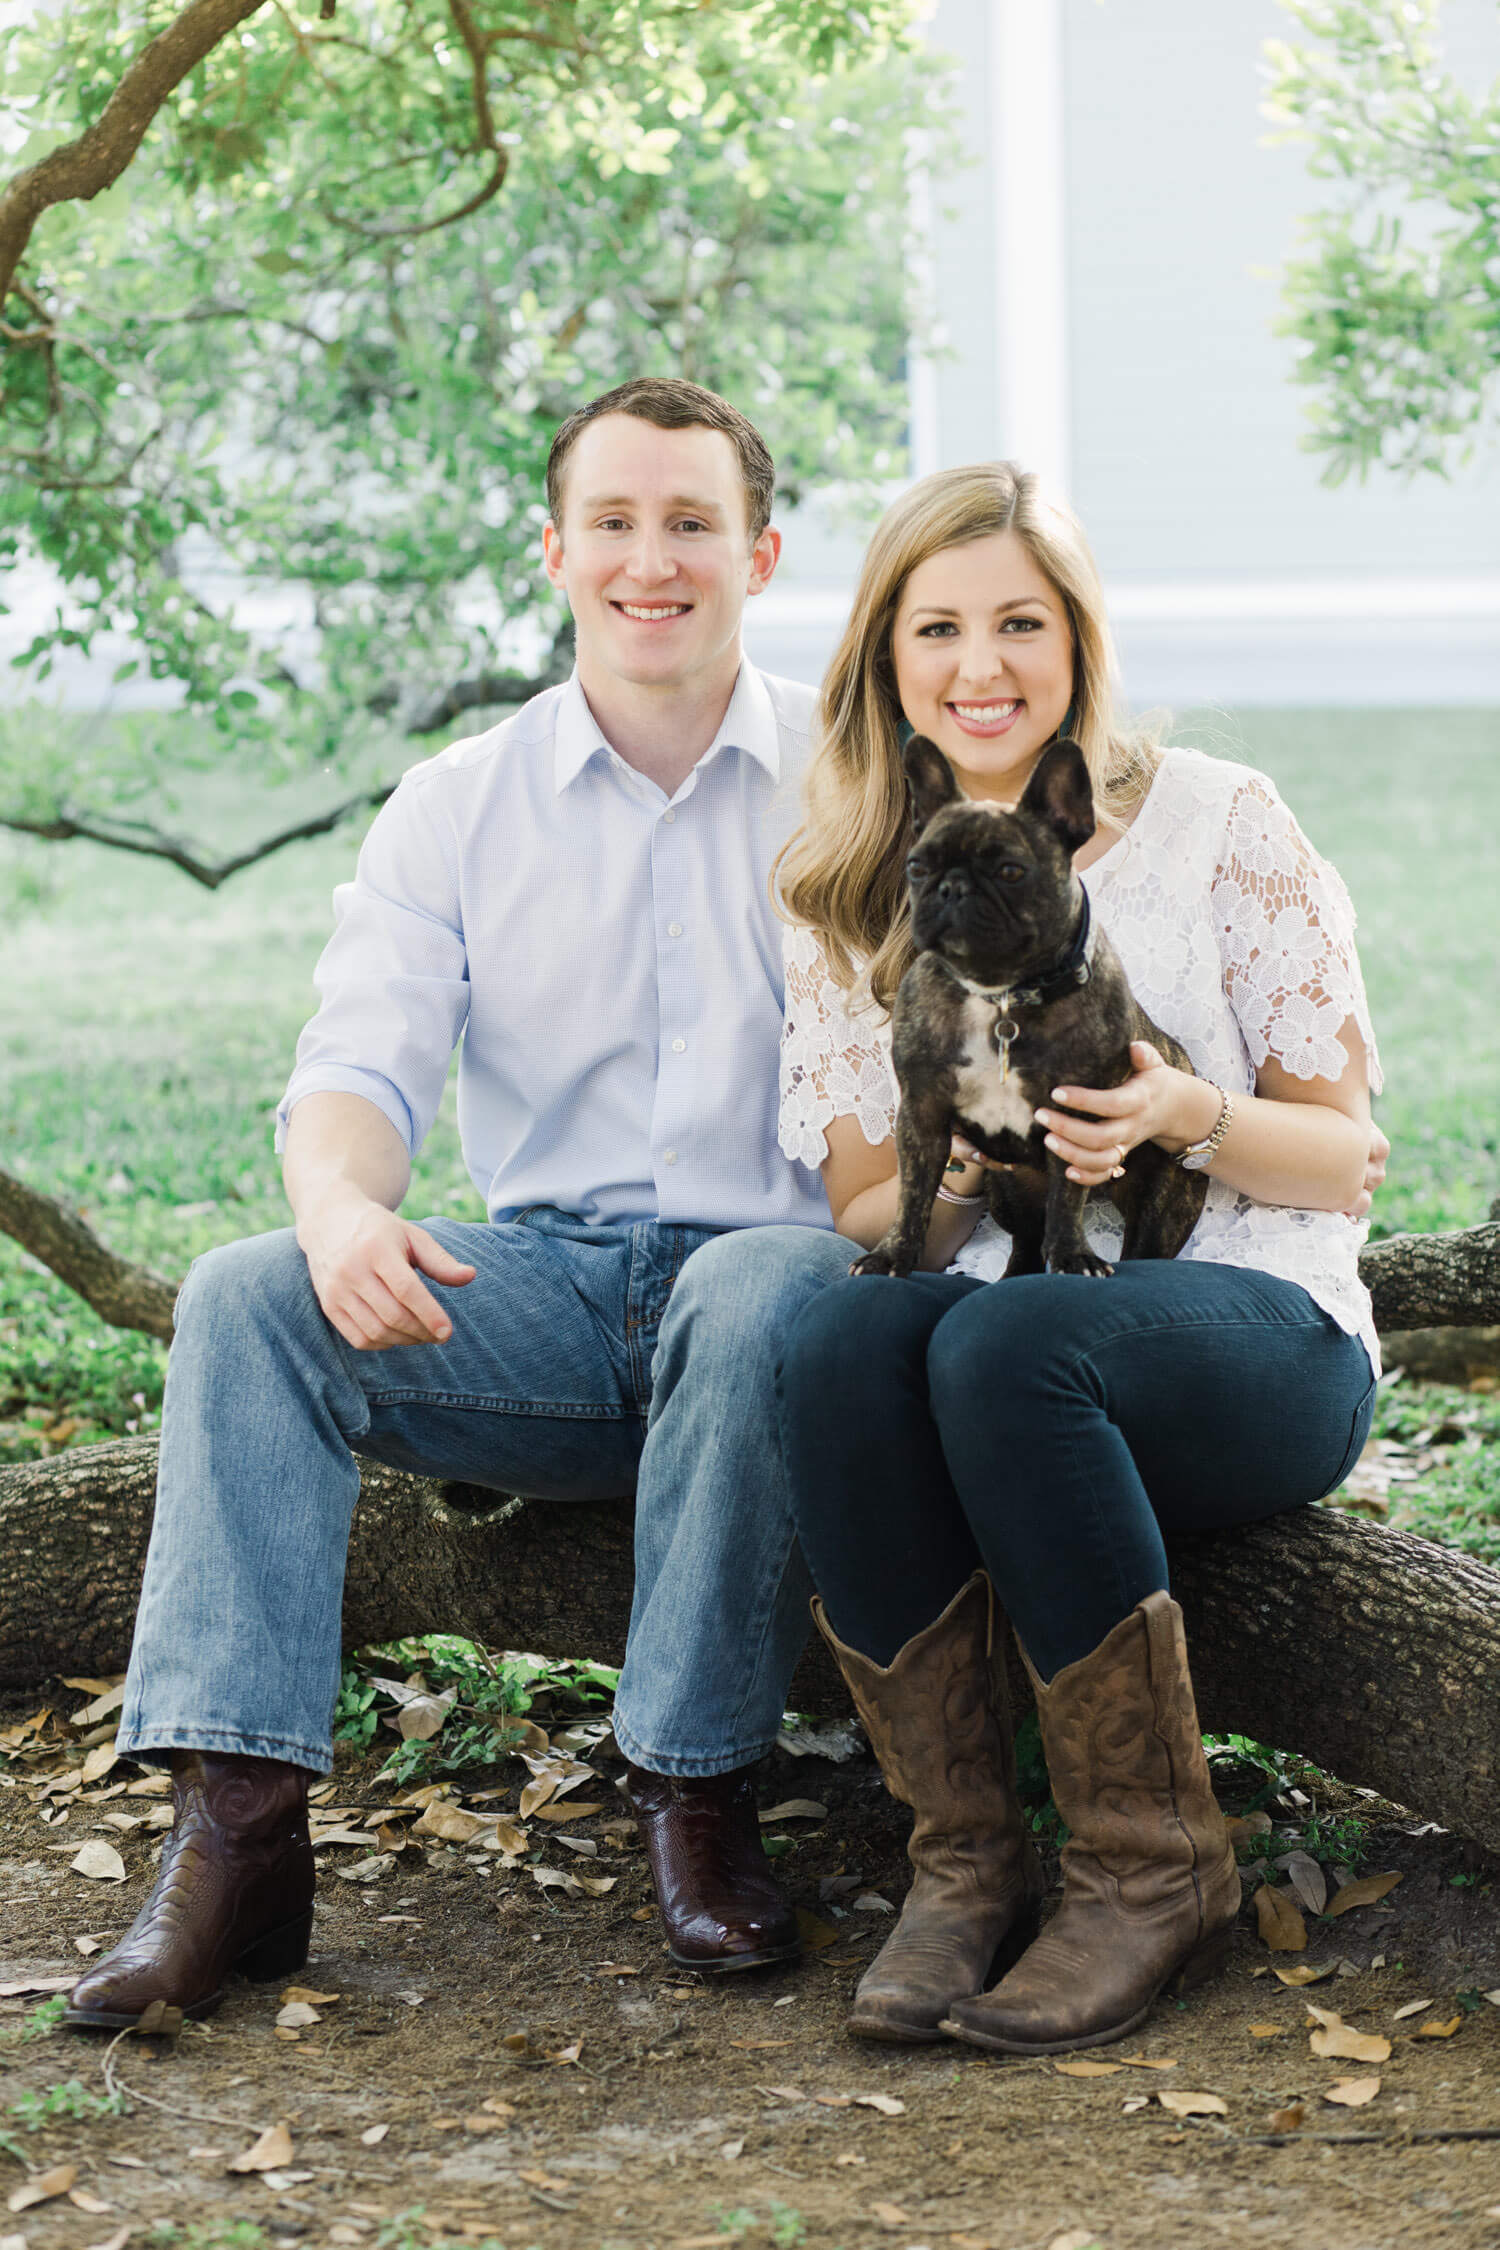 Engagement photography at The Menil Collection